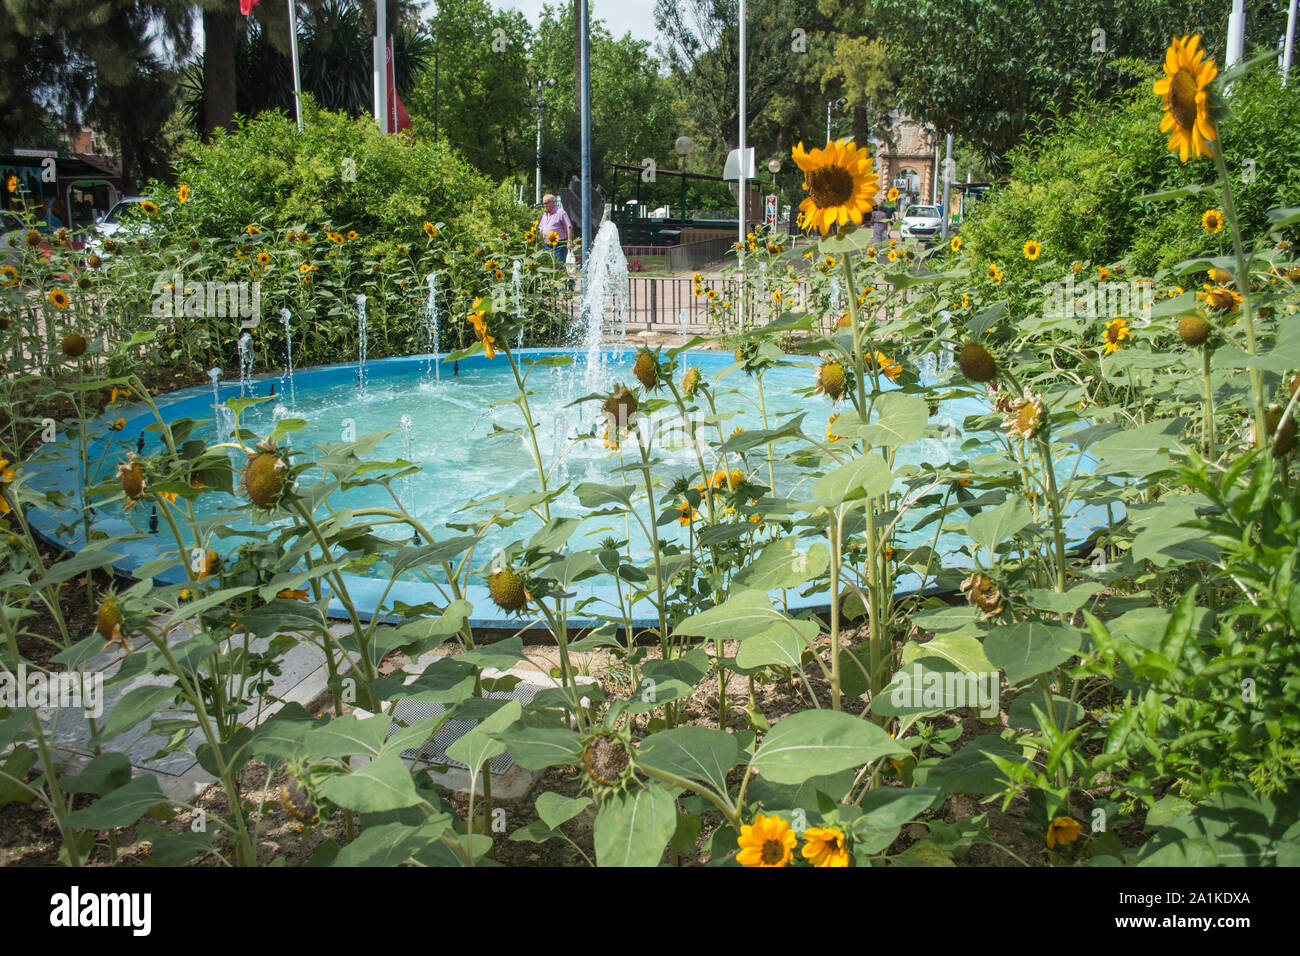 Sunflowers and a Water Fountain in the Jardin Botanico in the City of Murcia Spain Stock Photo